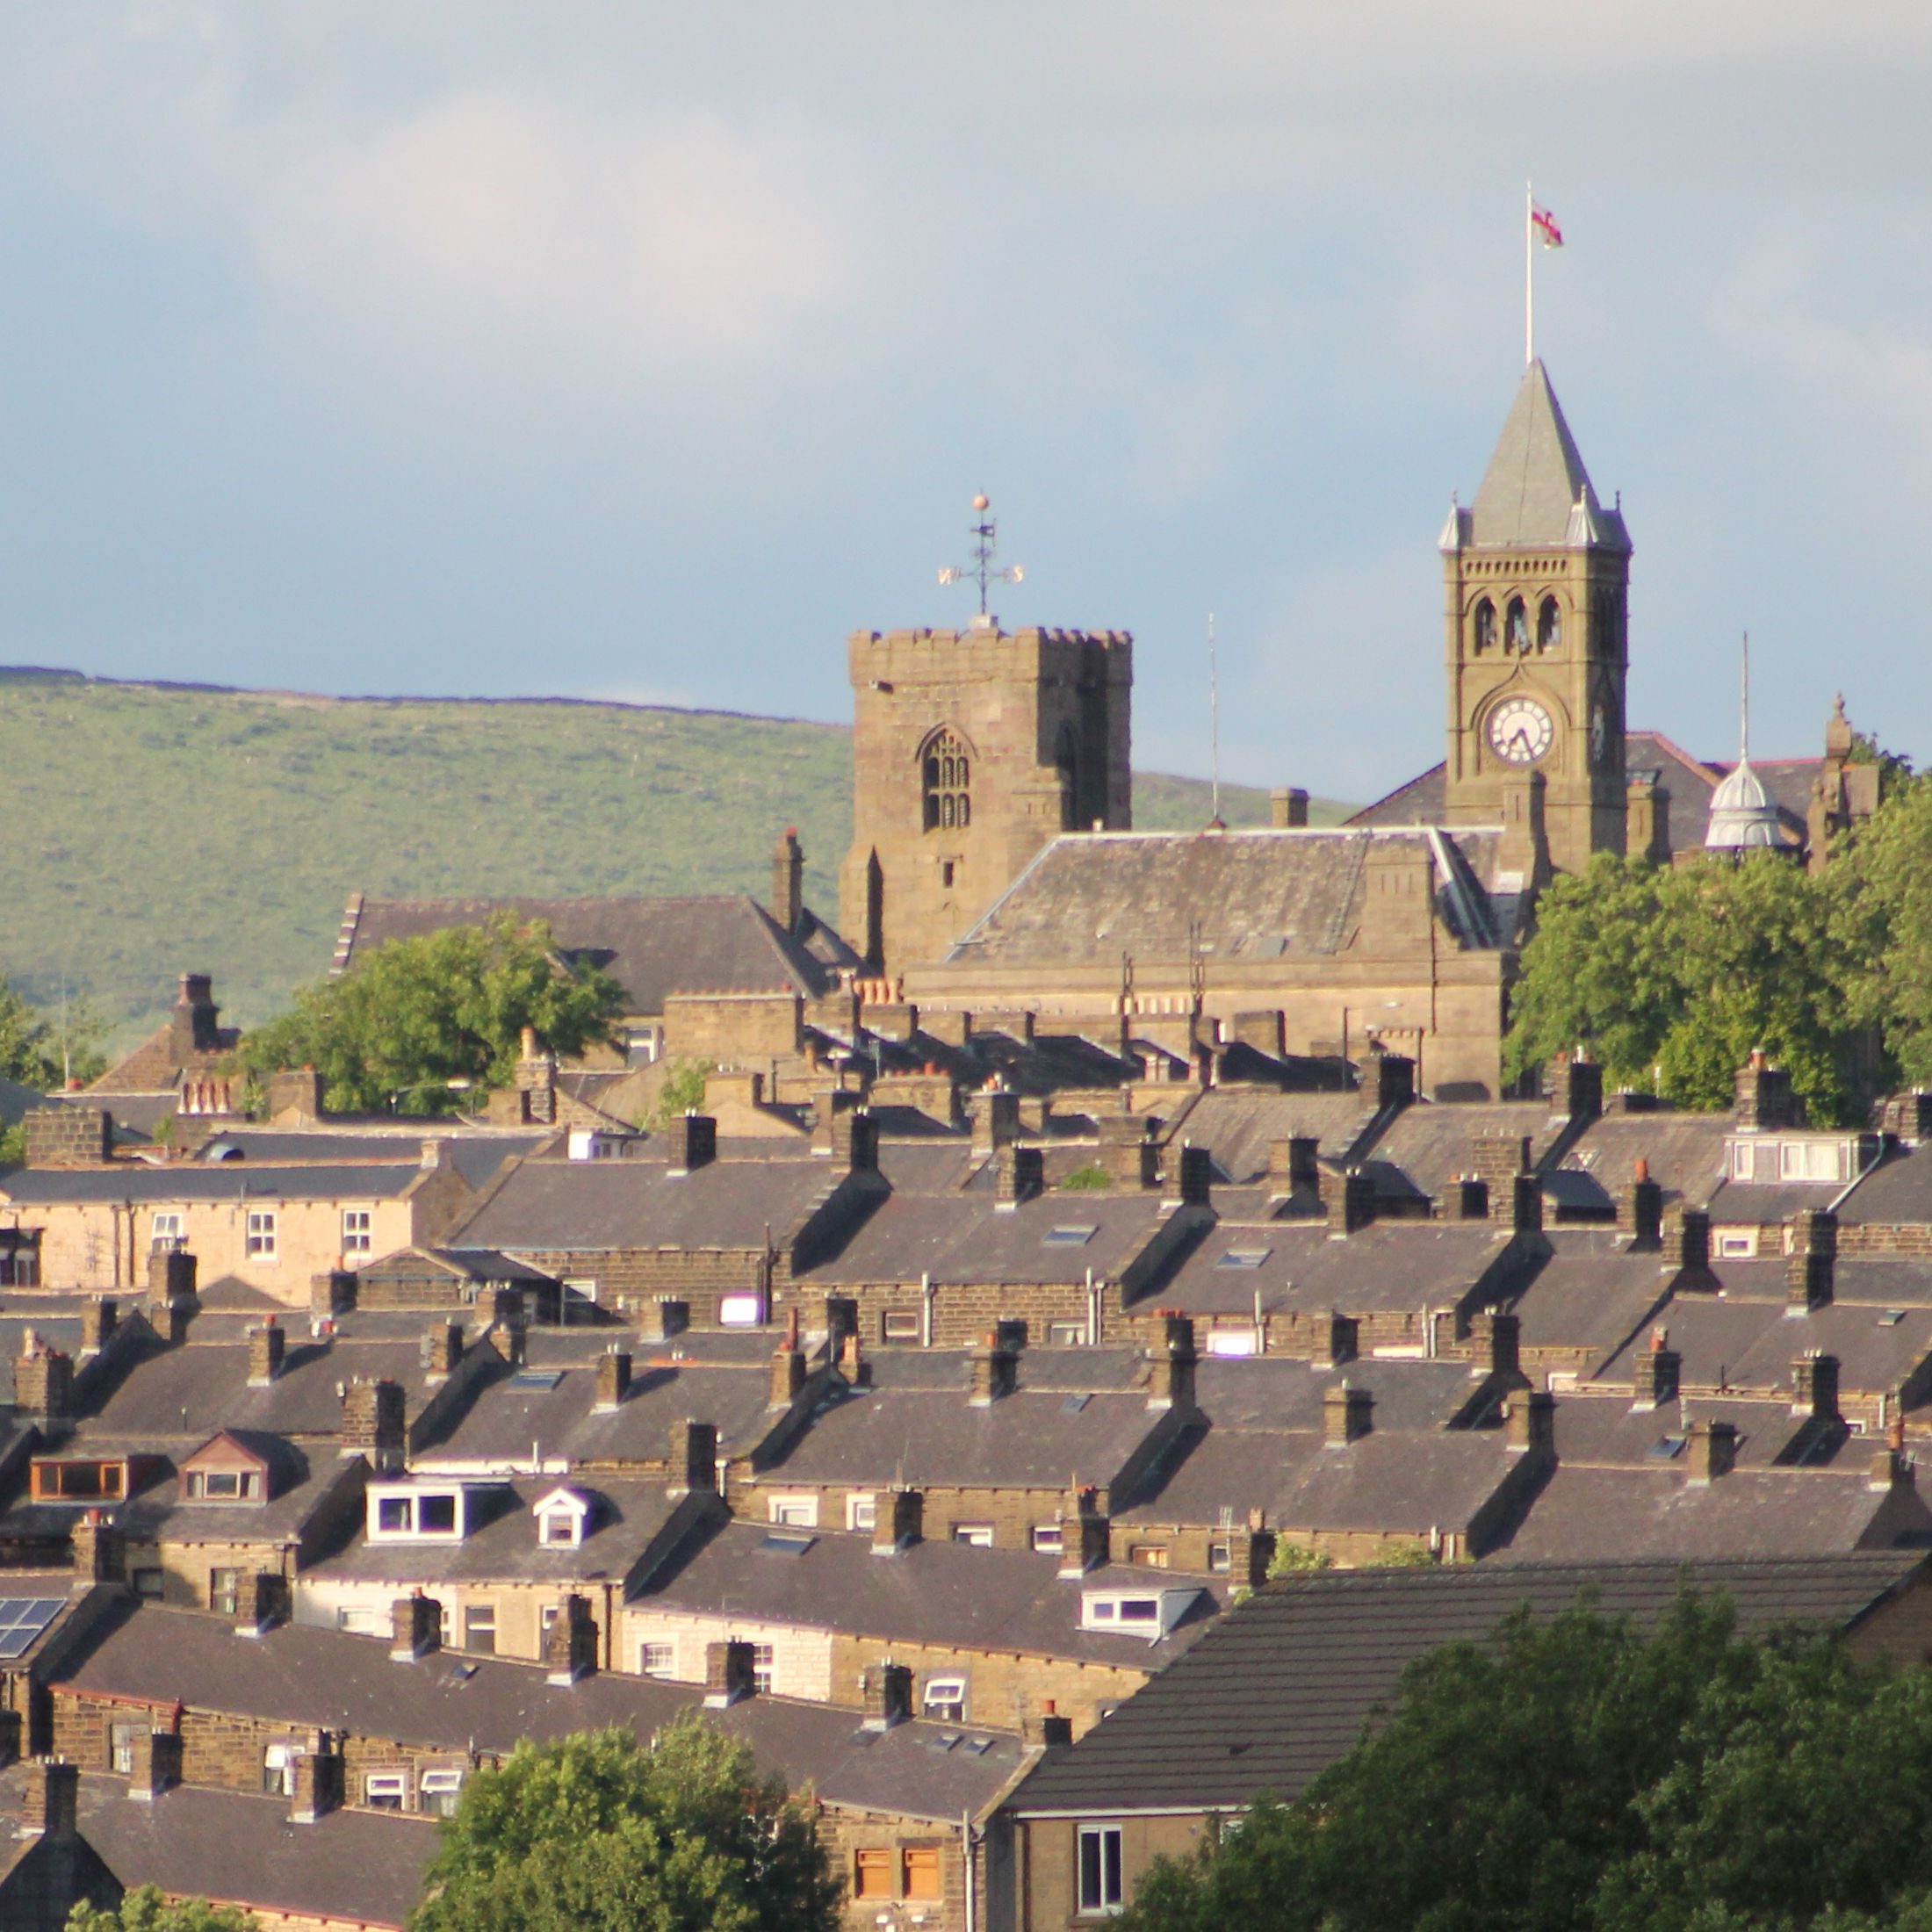 Rooftops of Colne